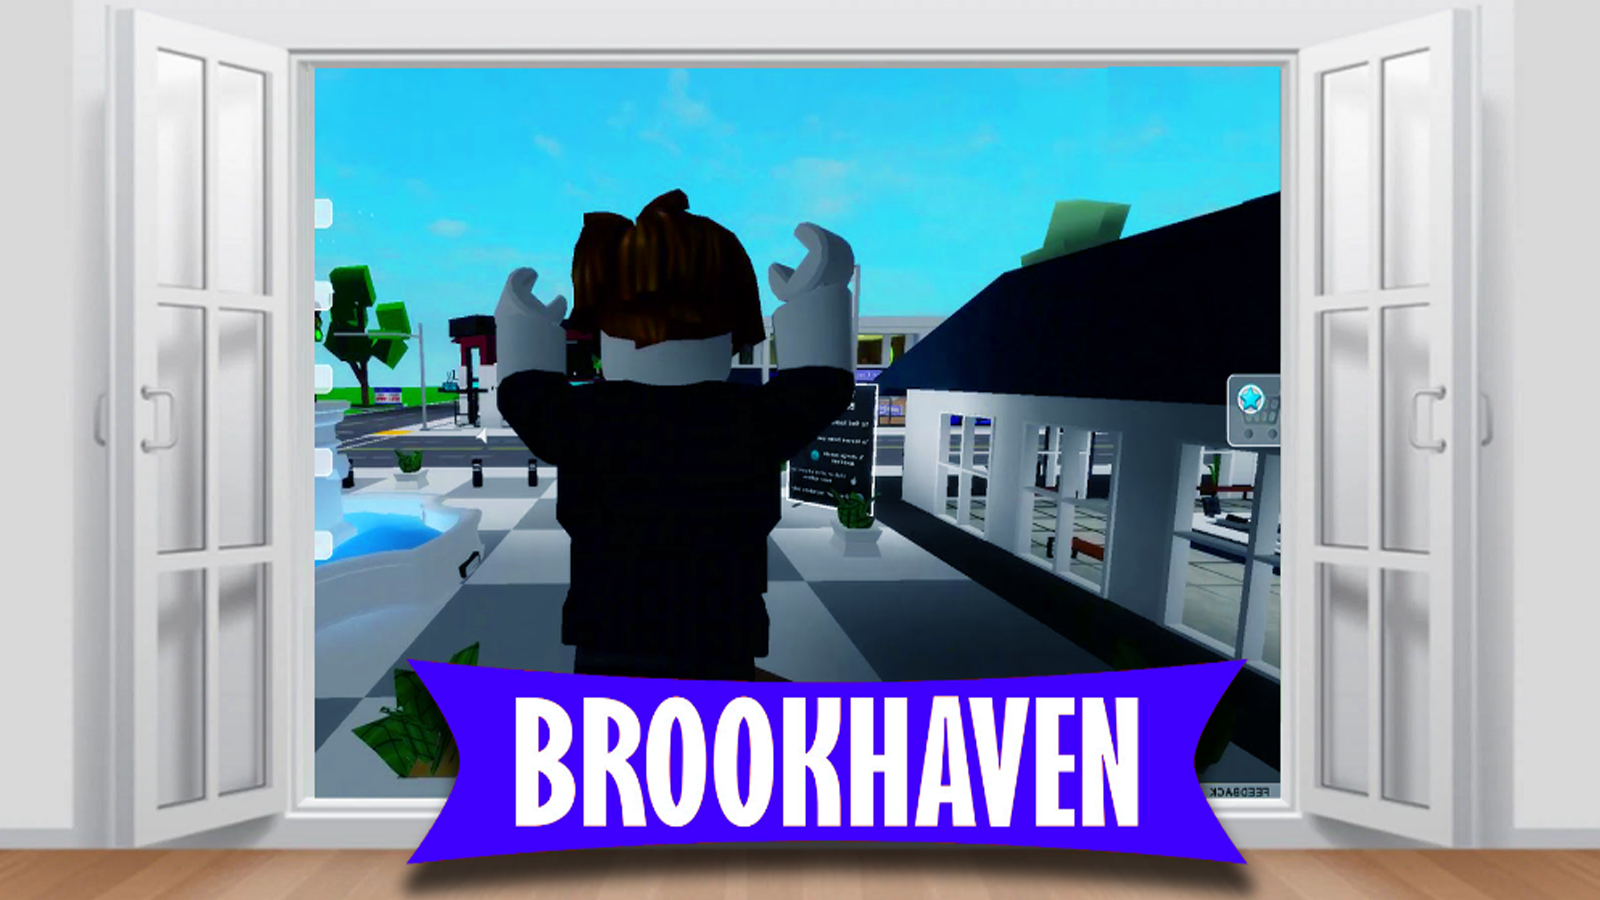 Brookhaven RP for ROBLOX - Game Download